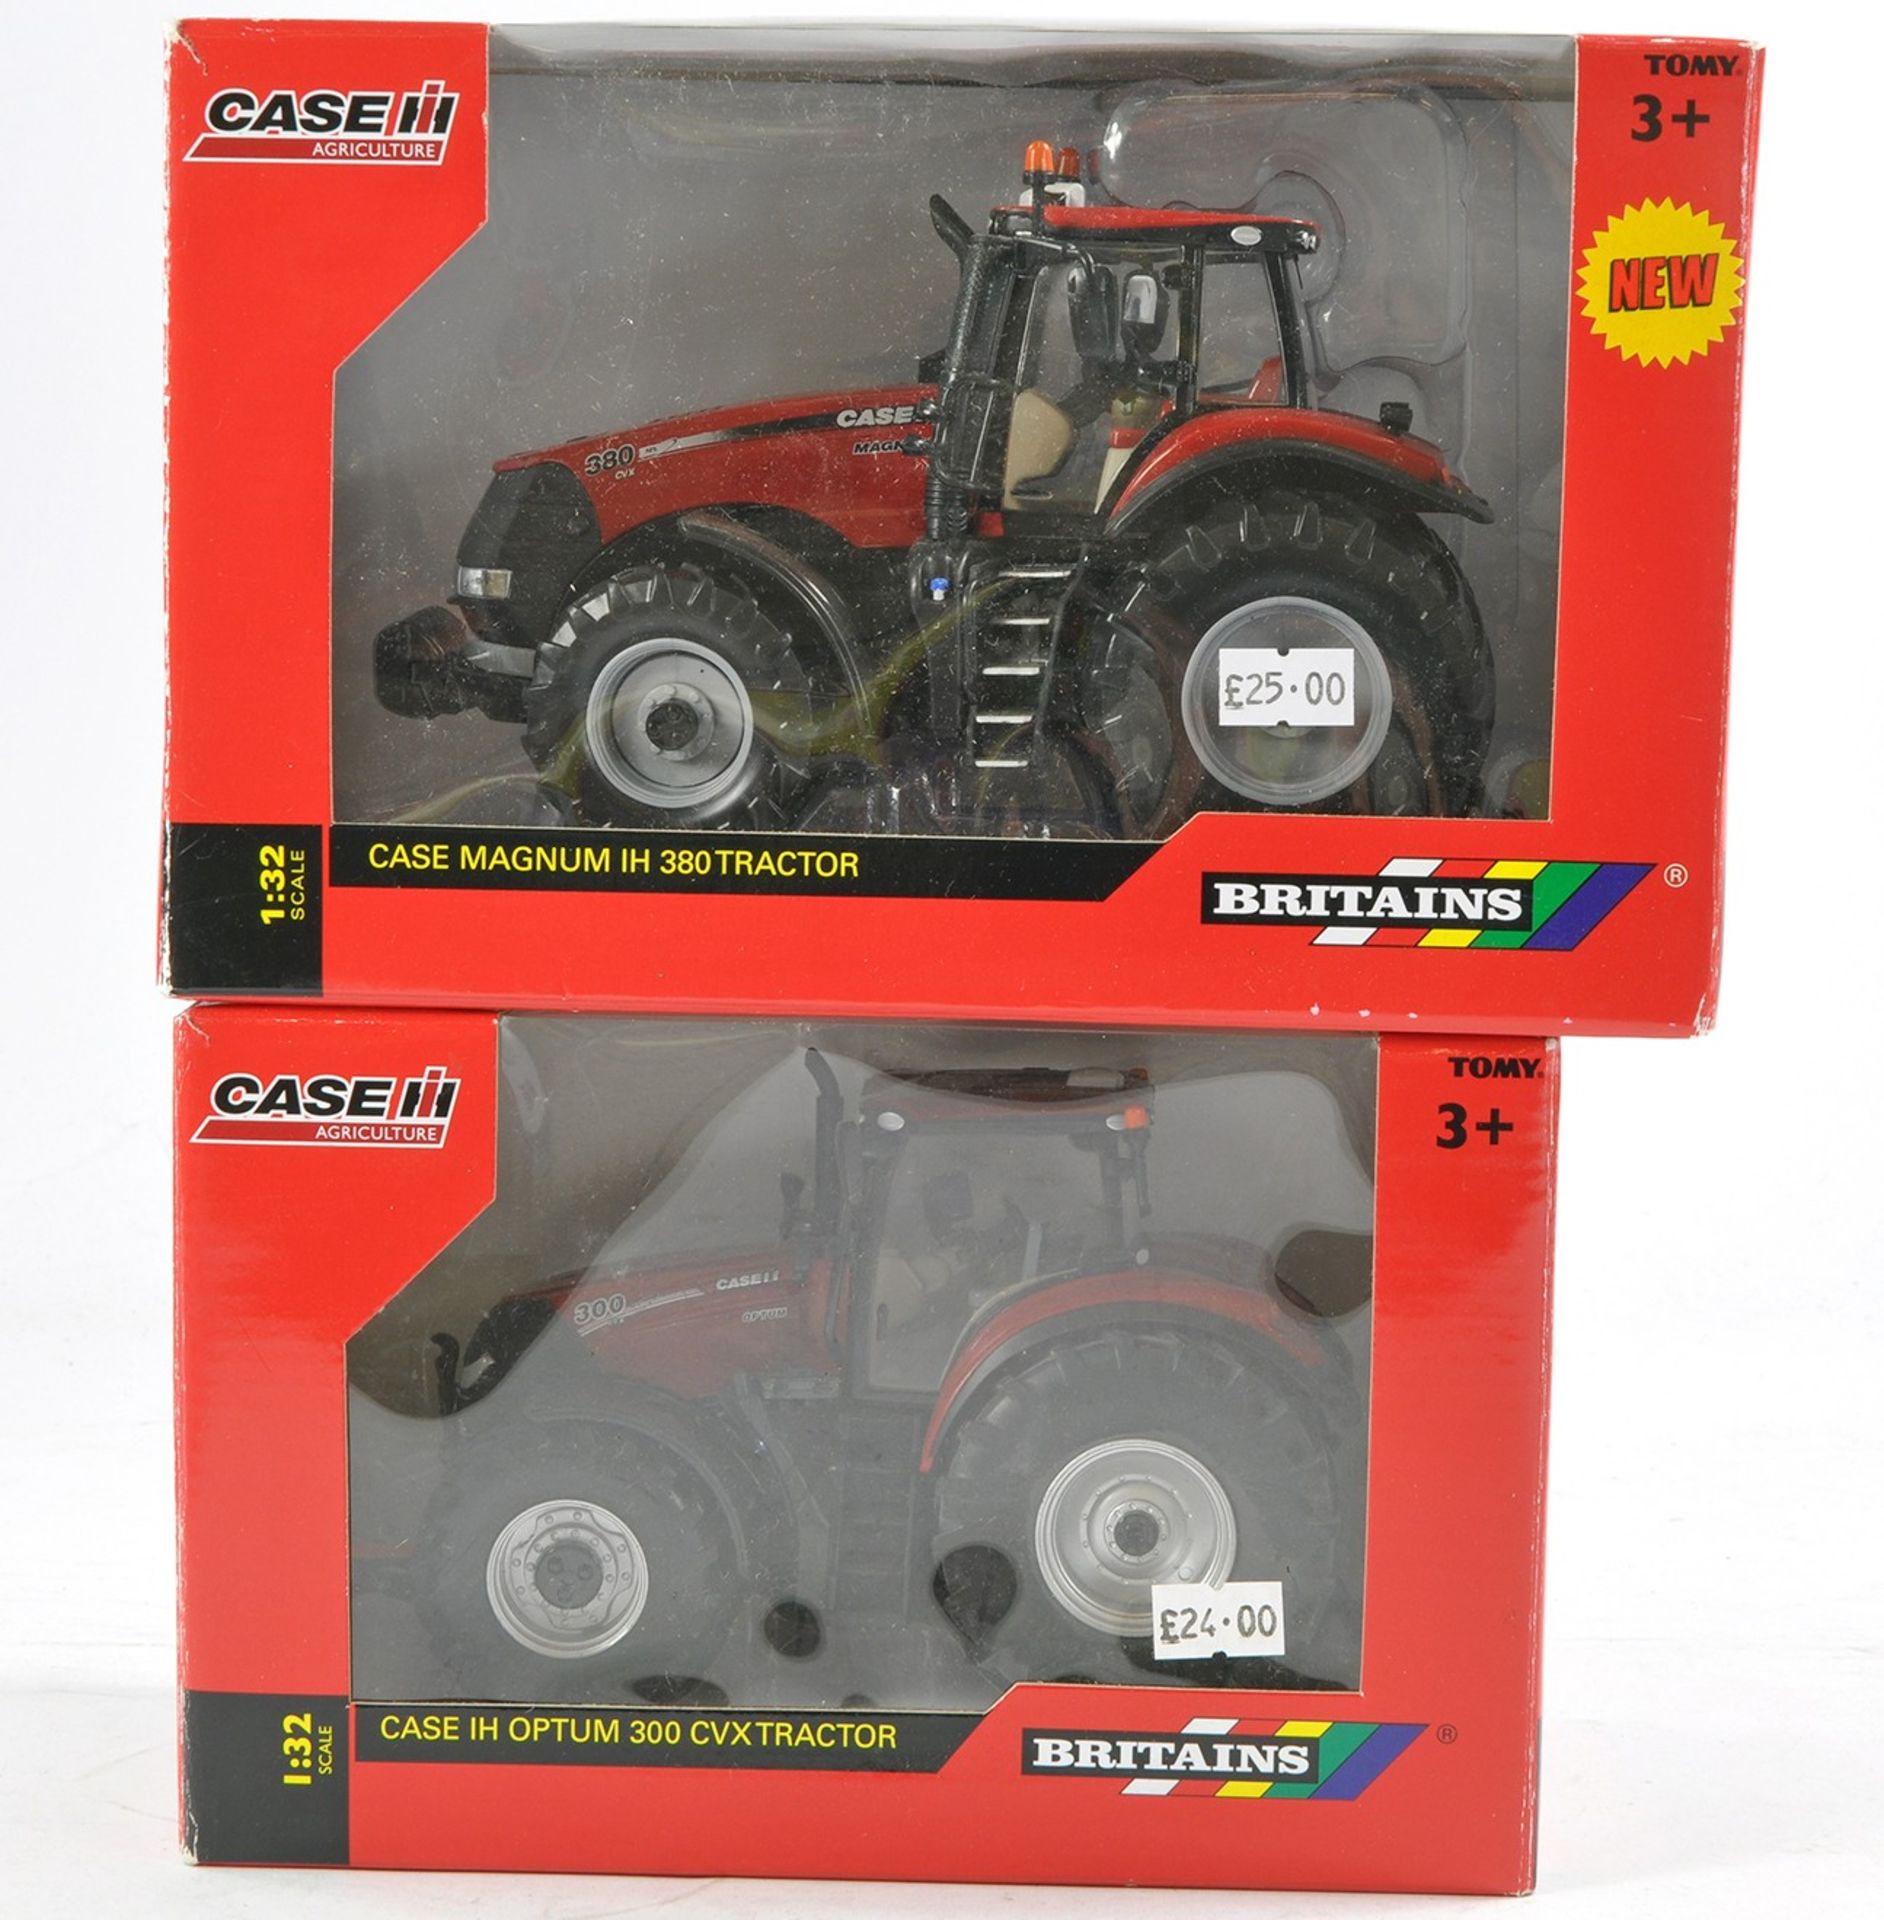 Britains 1/32 farm issues comprising Case IH Magnum 380 and Optum 300 Tractors. Both look to be